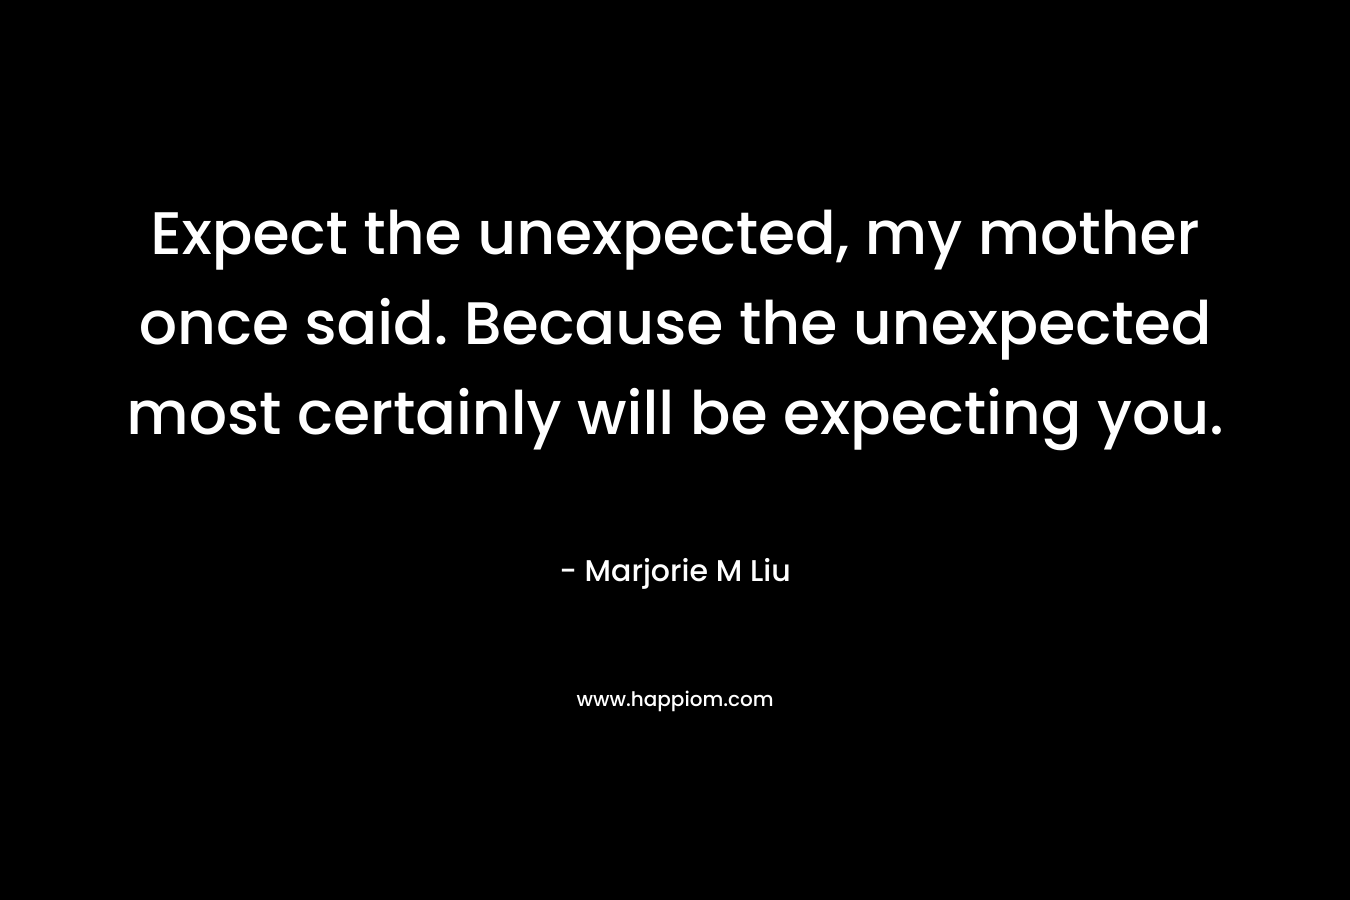 Expect the unexpected, my mother once said. Because the unexpected most certainly will be expecting you.